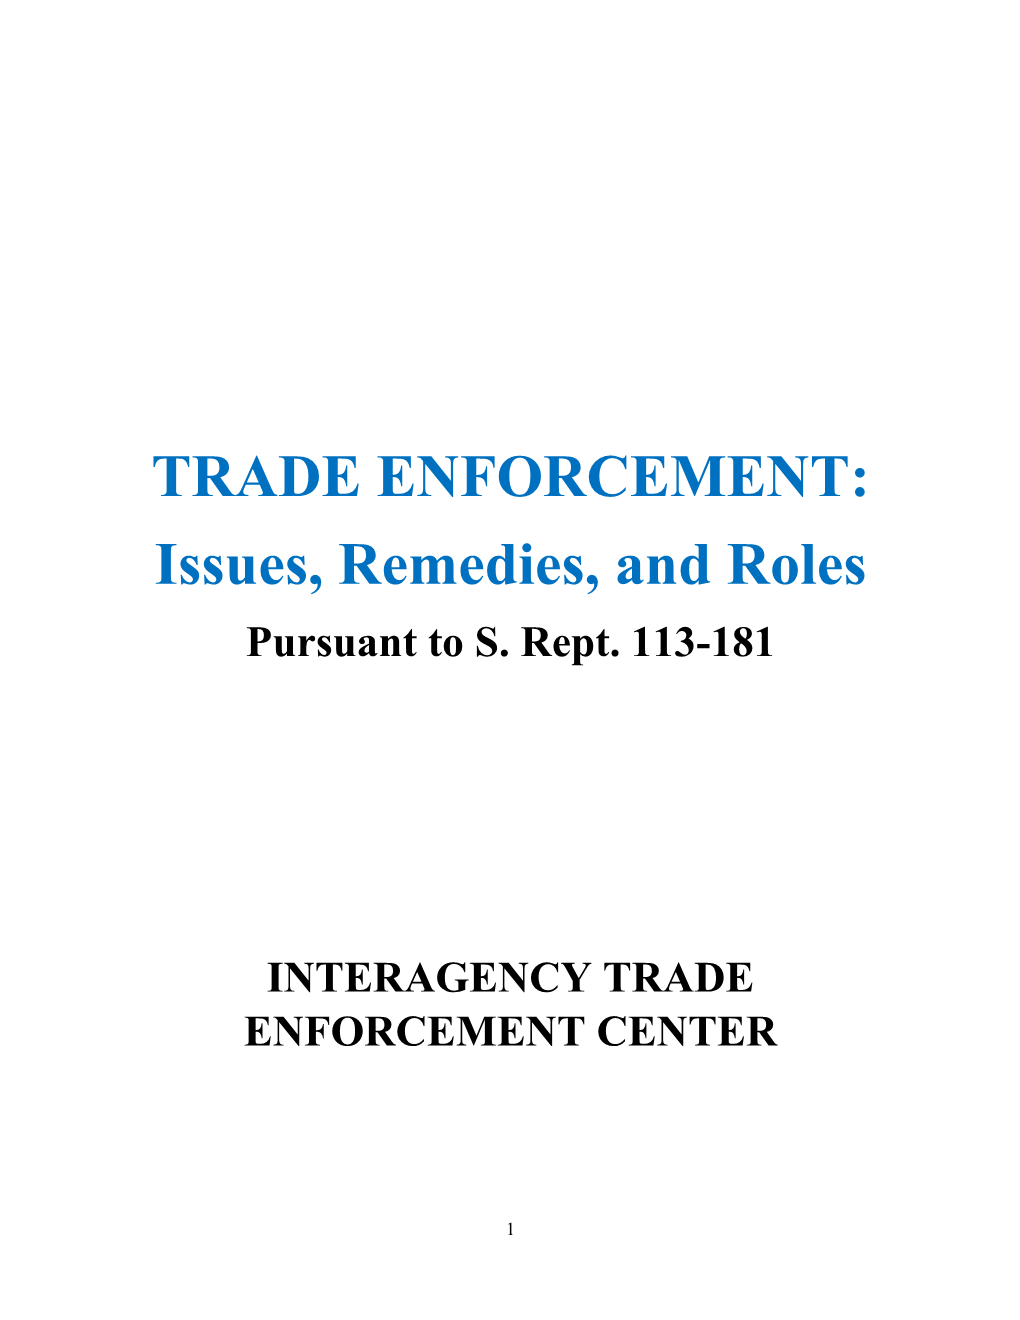 TRADE ENFORCEMENT: Issues, Remedies, and Roles Pursuant to S